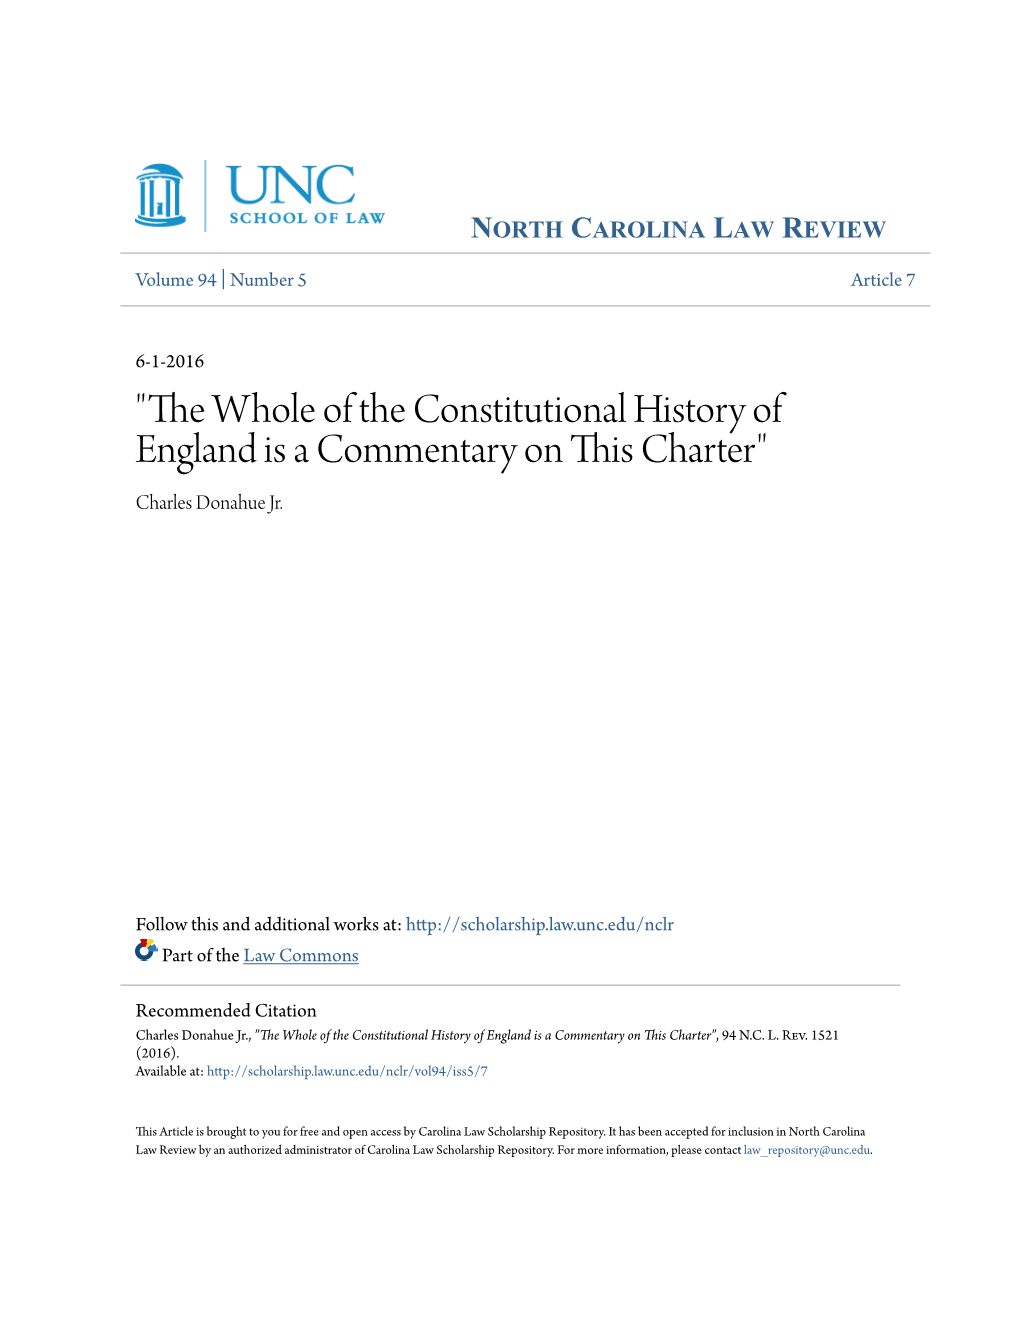 "The Whole of the Constitutional History of England Is a Commentary on This Charter" Charles Donahue Jr